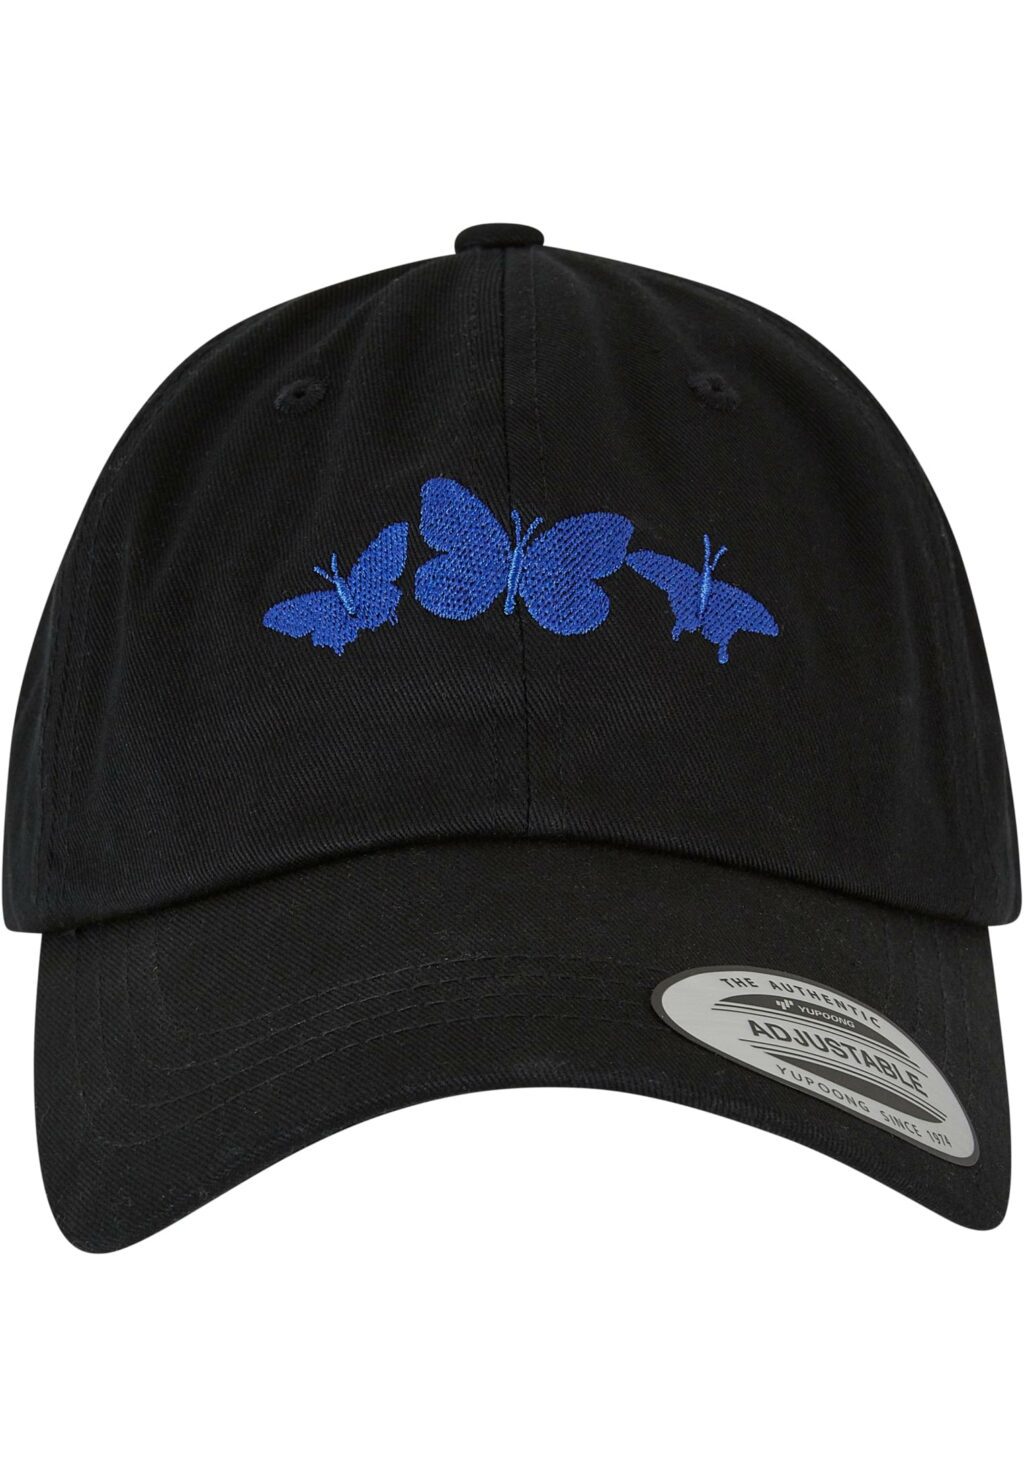 Butterfly Cap black one BE081